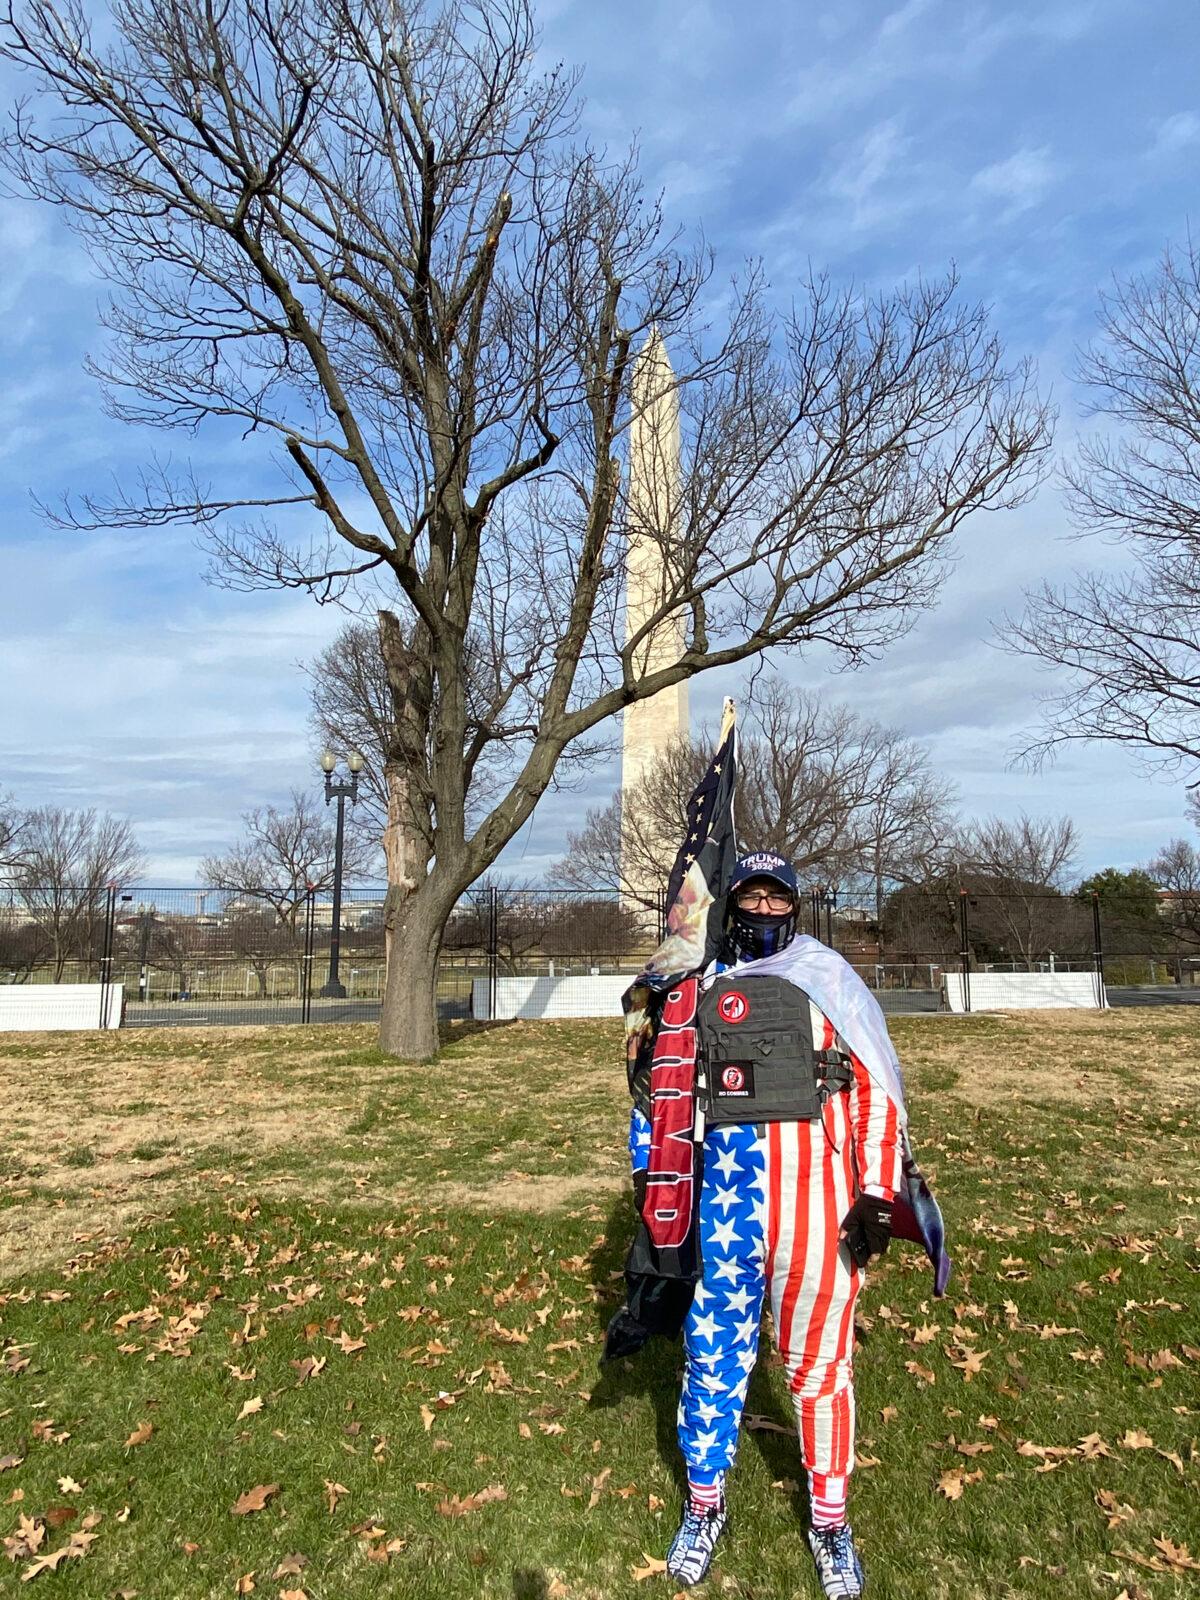 A Trump supporter who drove five hours from Connecticut and arrived in Washington on Jan. 17 said: “American patriots need to continue to be proud. We need to continue to support Donald Trump.” He declined to share his name. (Terri Wu/The Epoch Times)